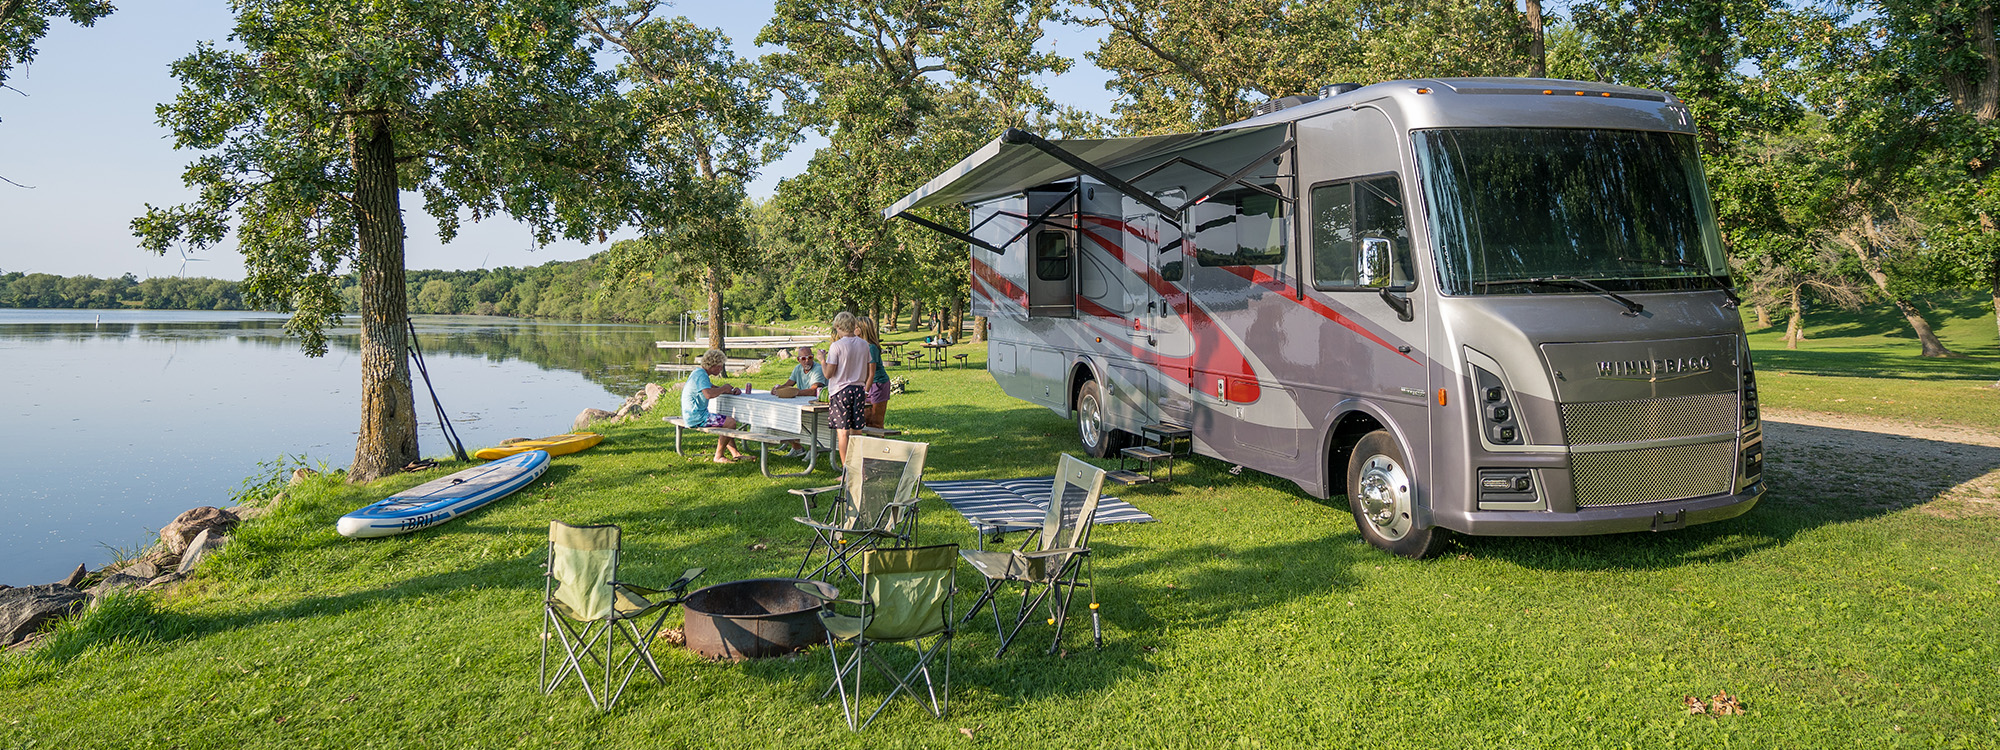 Winnebago Vista parked beside a body of water, with a group of people gathered around a nearby table